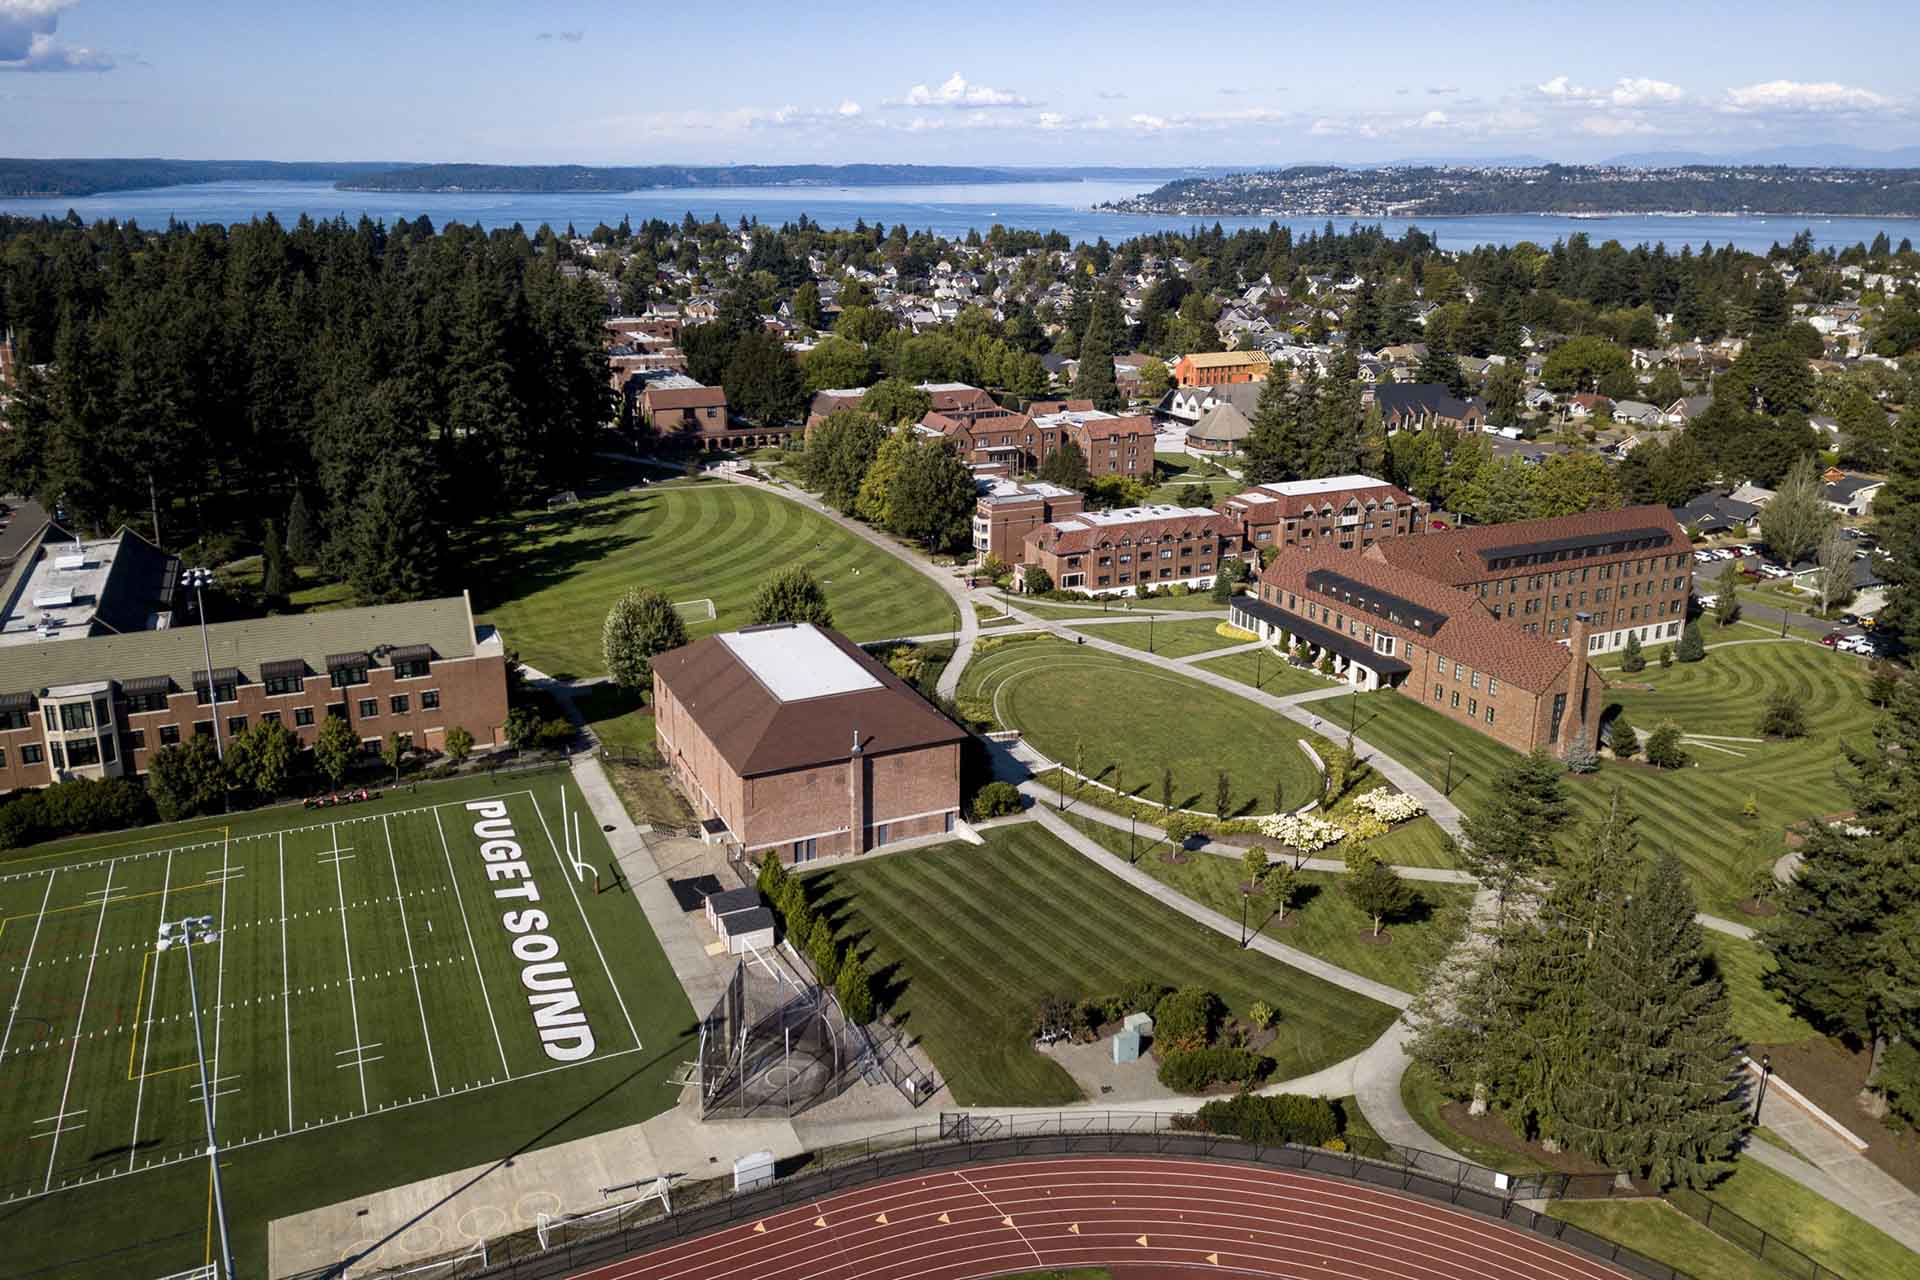 Beta Theta Pi Fraternity Closes Chapter at the University of Puget Sound